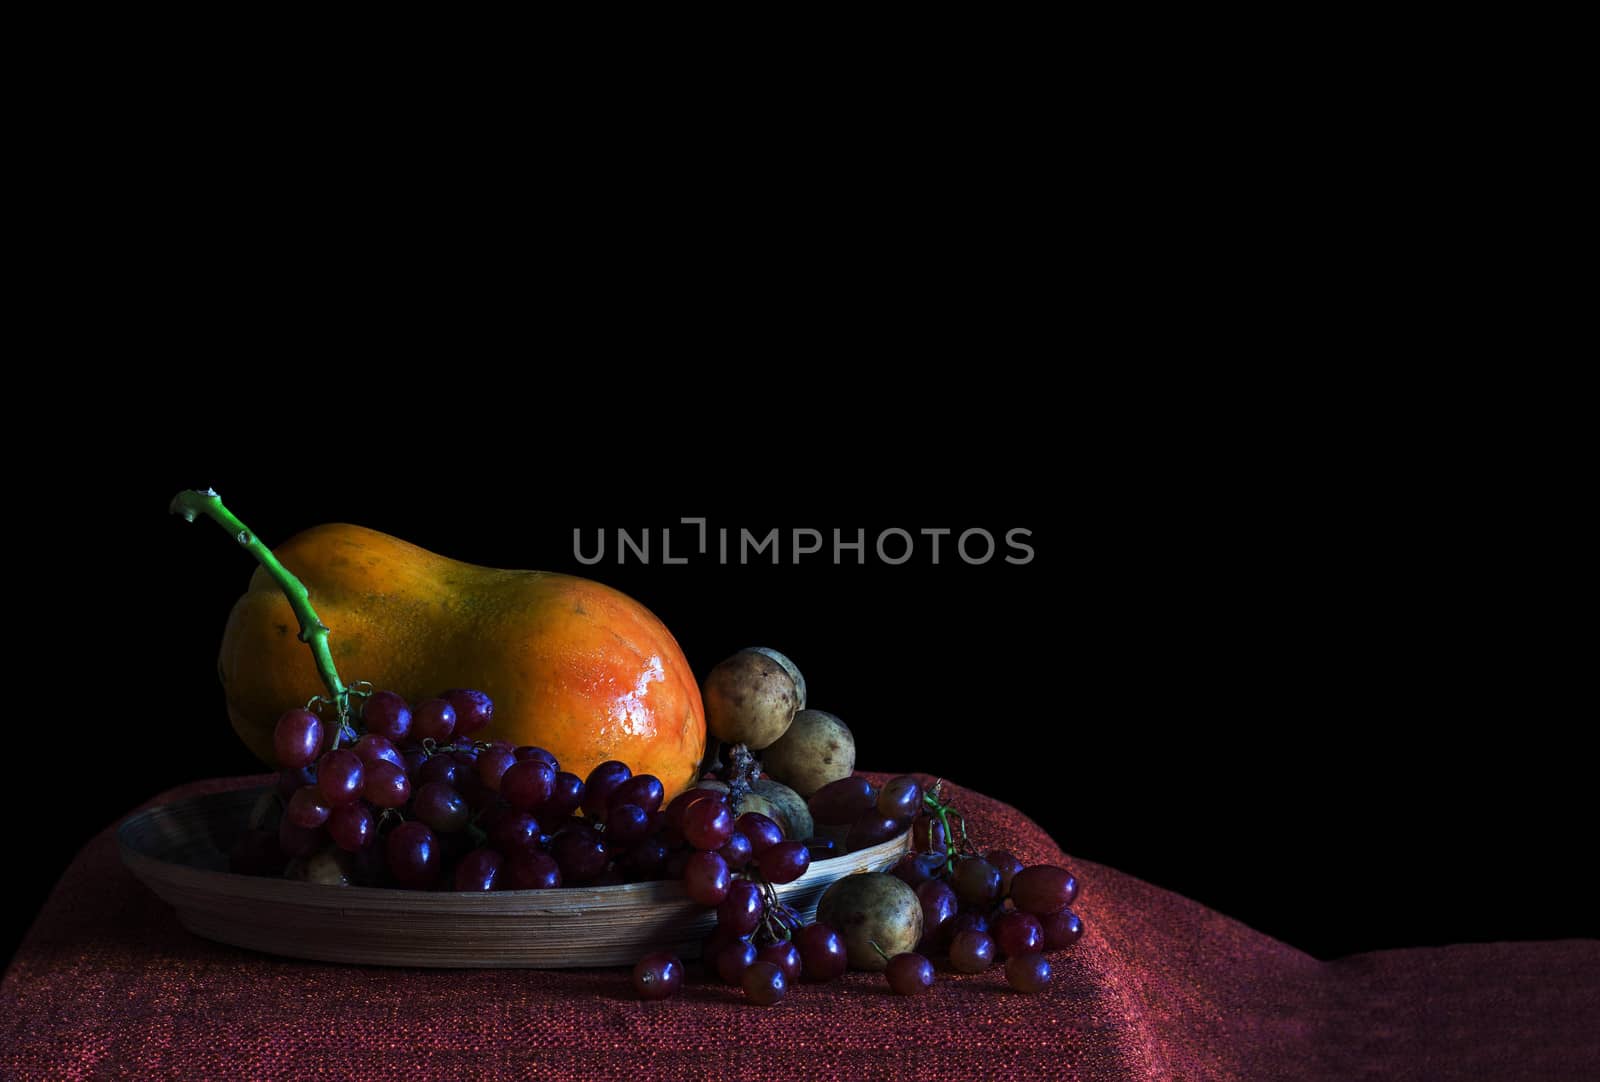 Grapes and papaya on a tray with a black background.